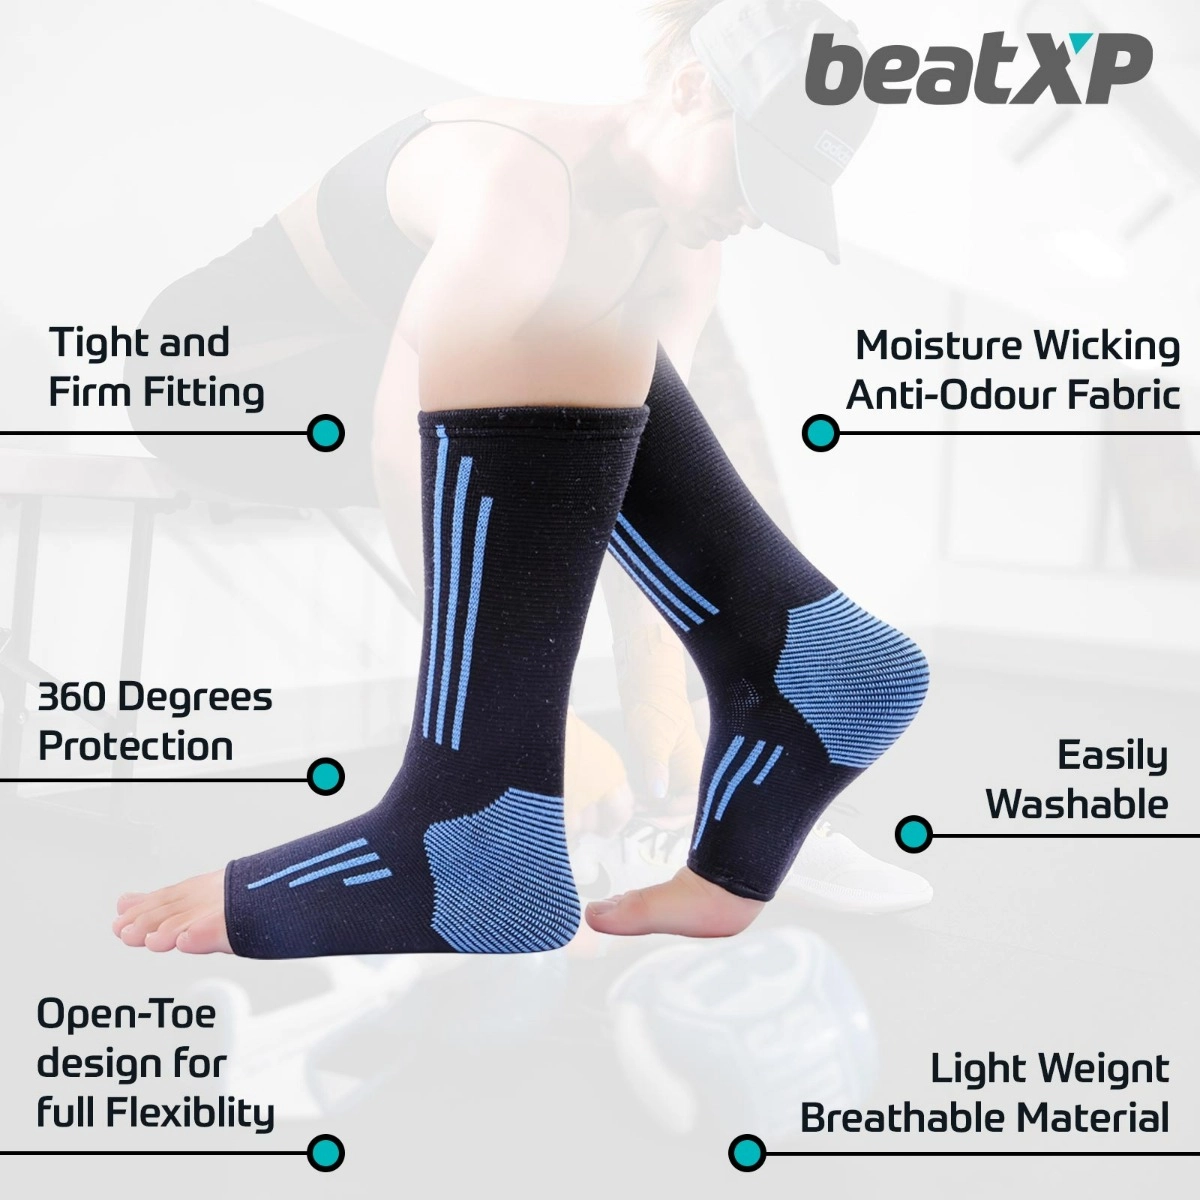 beatXP Ankle Support | Blue specifications 